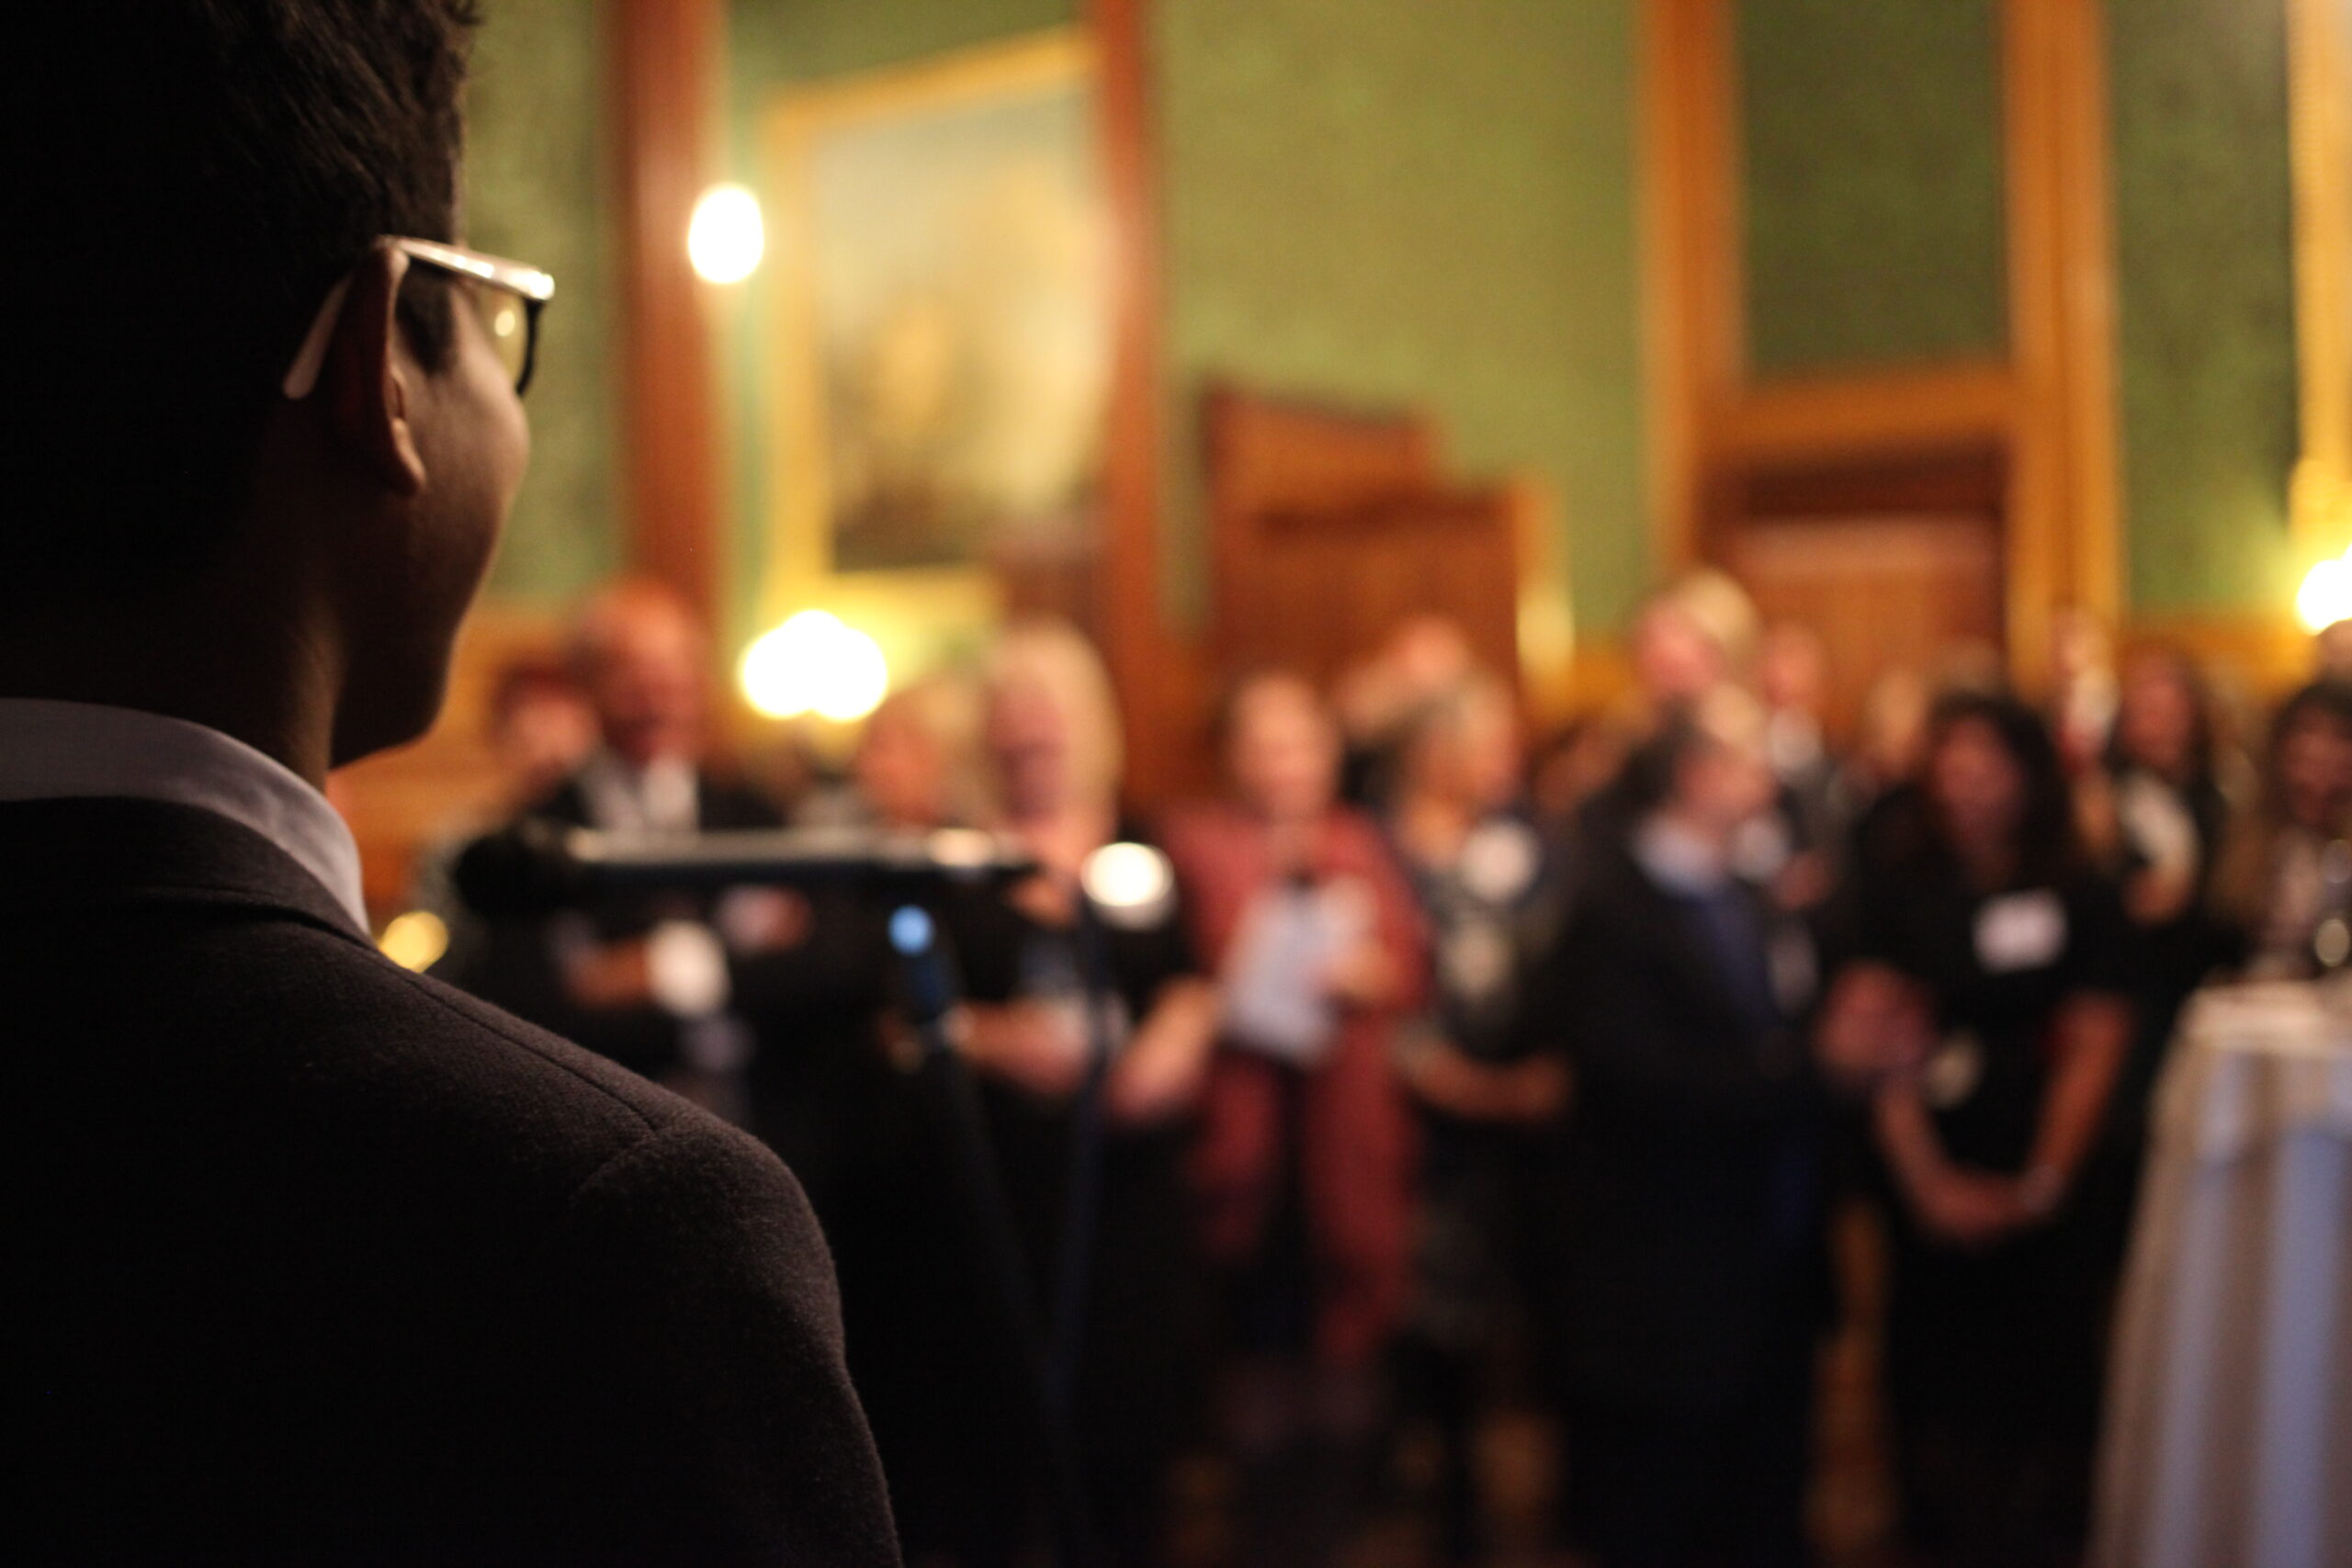 20th Anniversary Celebration at the House of Lords